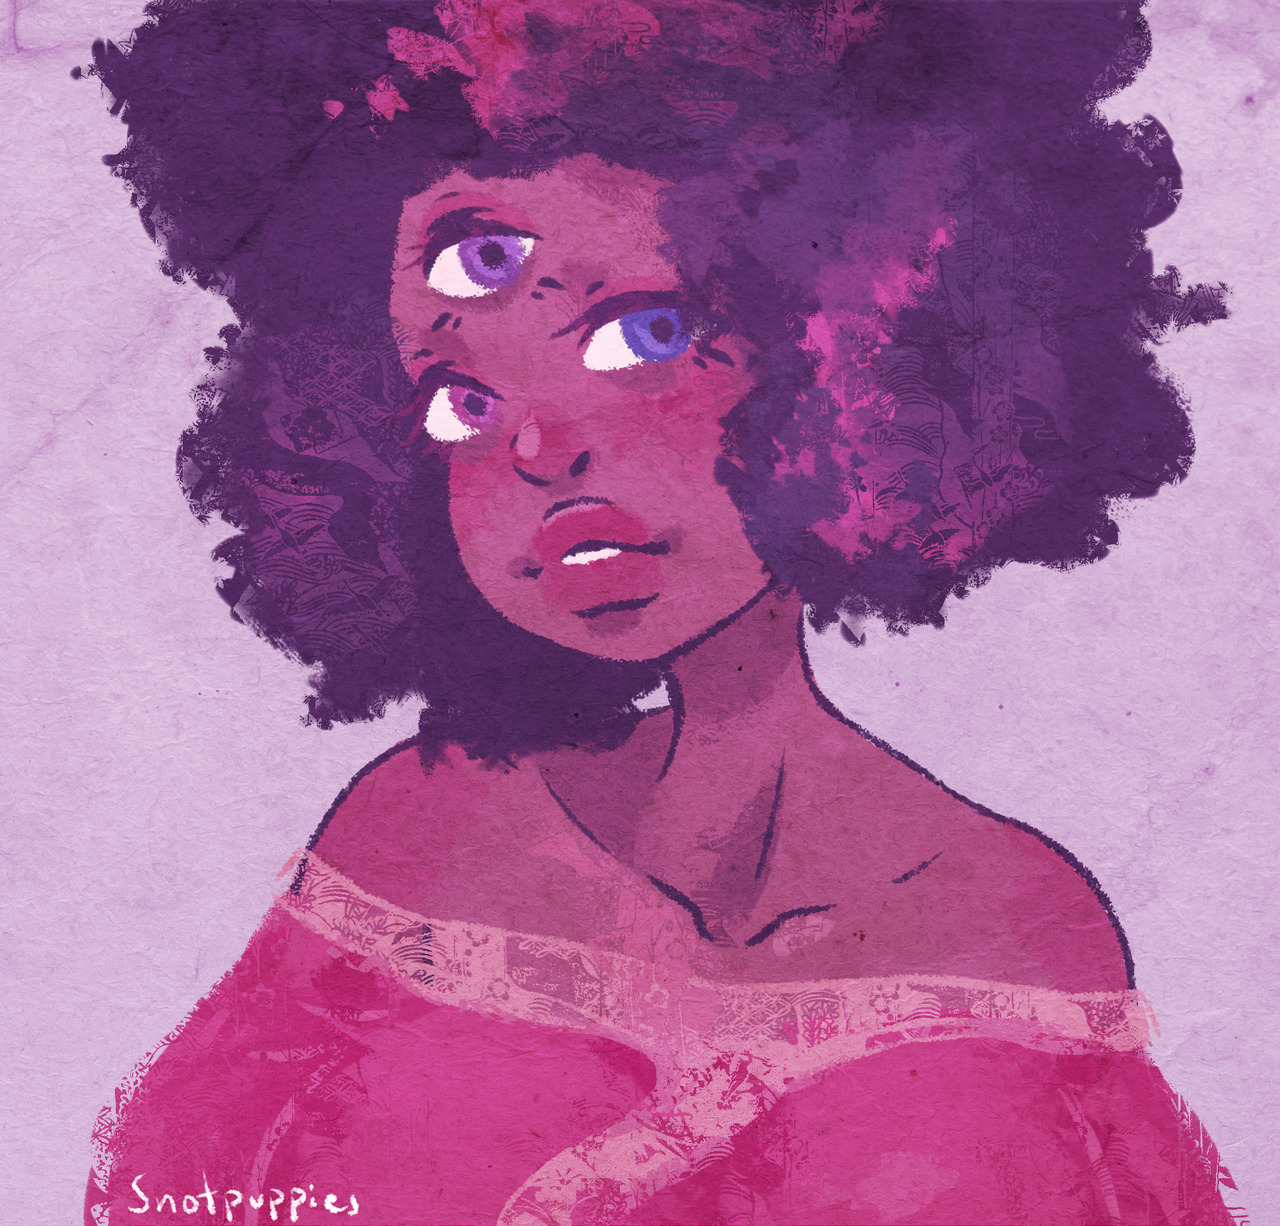 Garnet, Amethyst and Pearl – in the 80s!